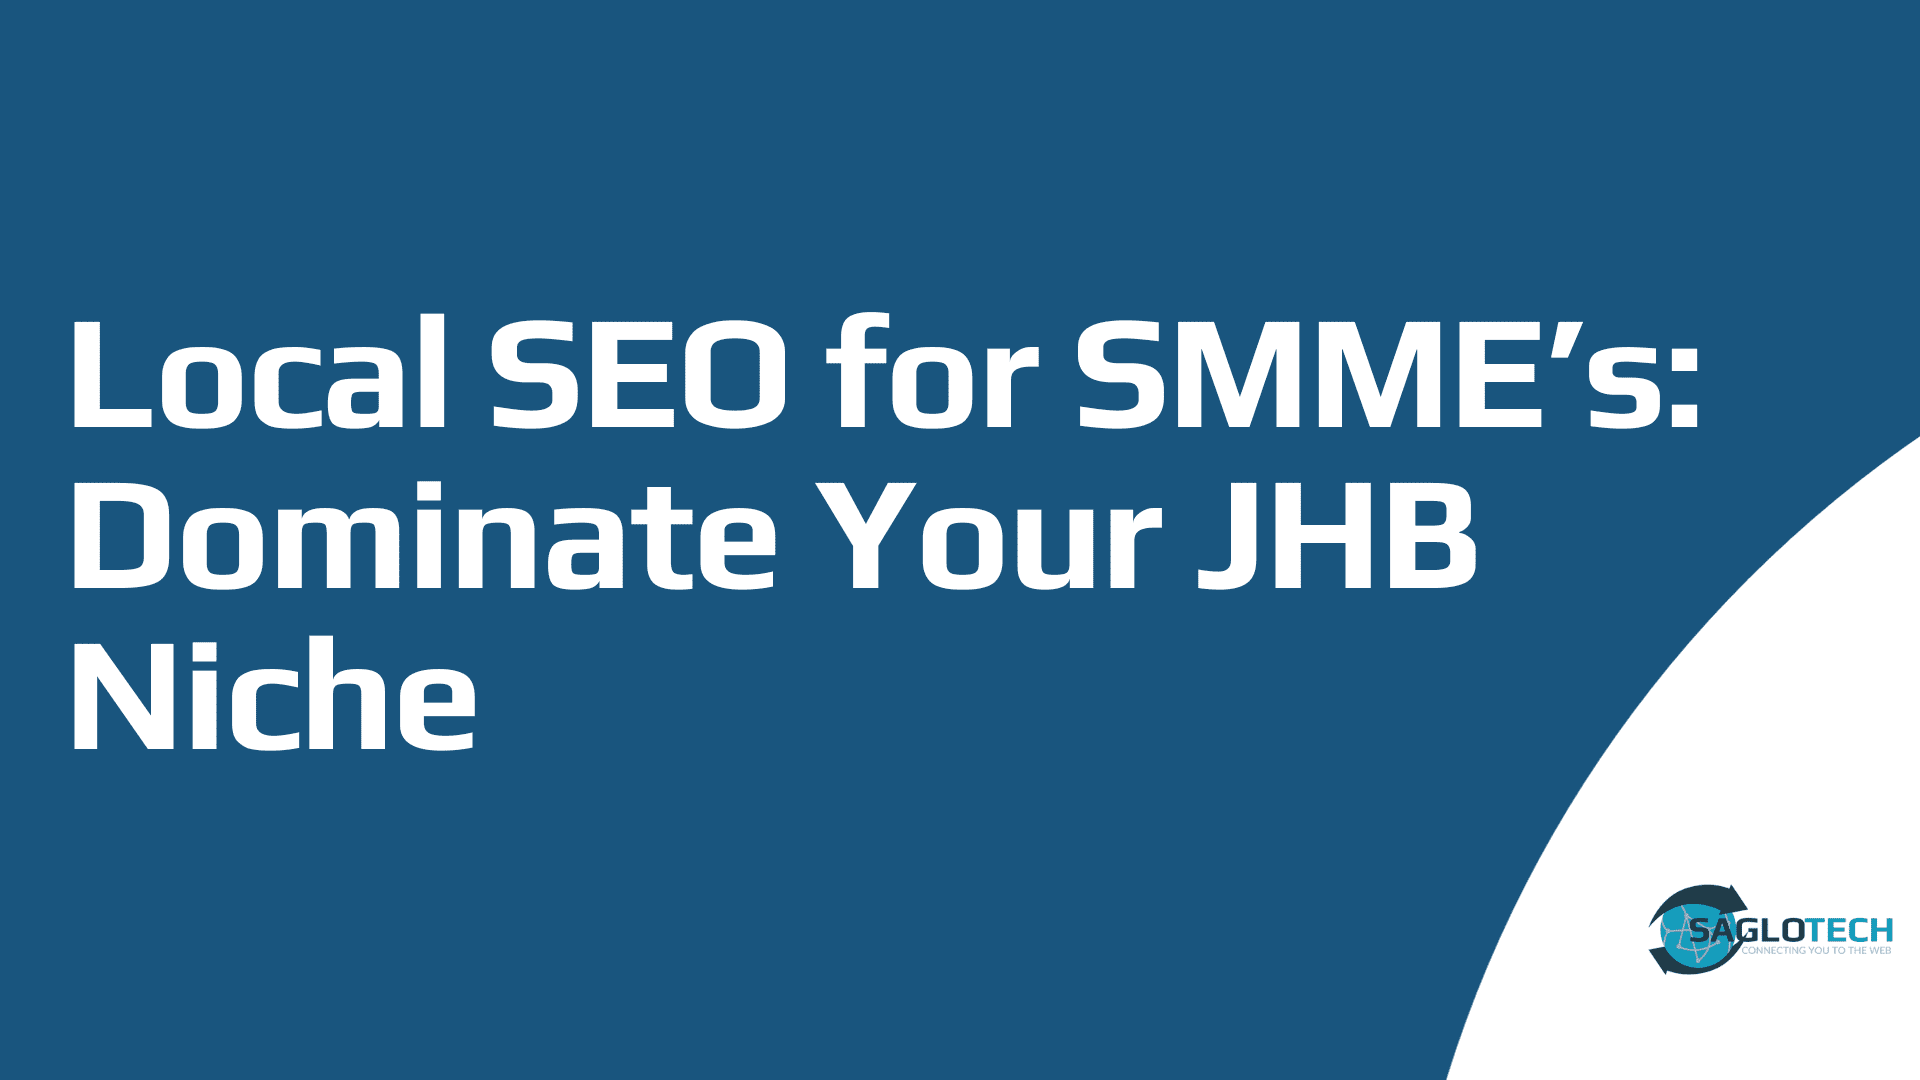 Local SEO for Small Businesses: Dominate your Johannesburg Niche